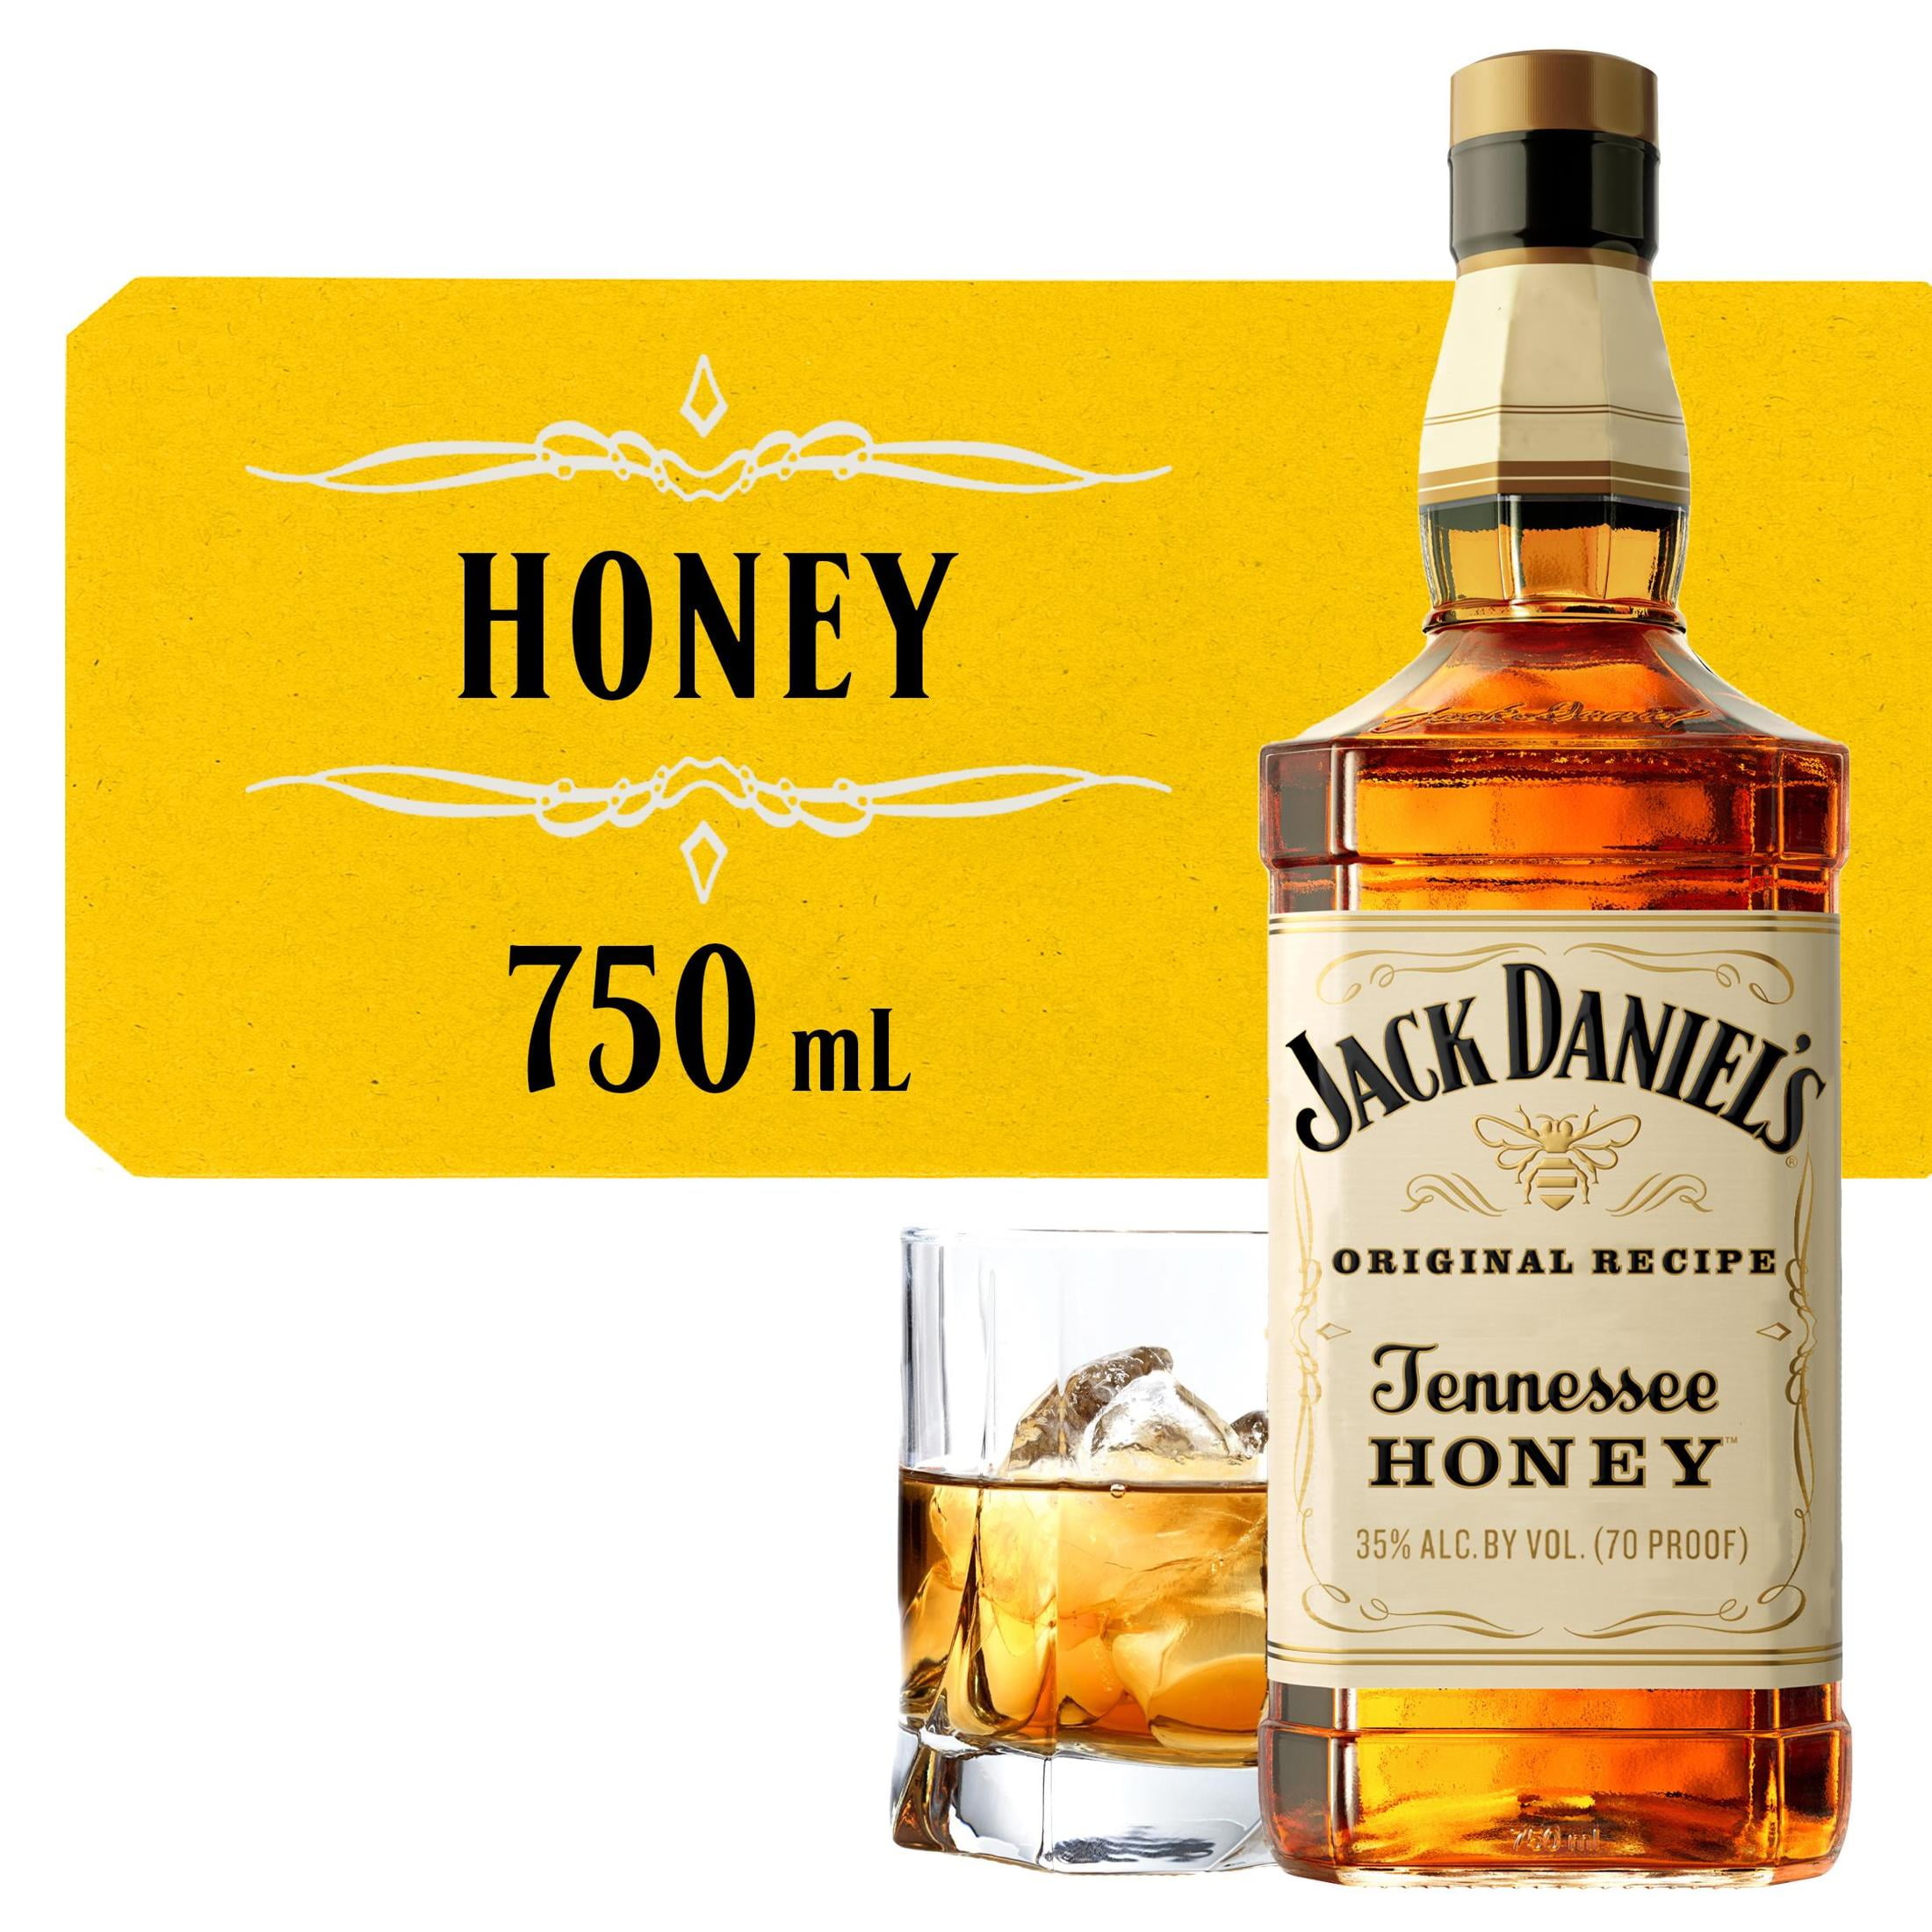 Jack Daniel's Tennessee Honey 100 ml : Alcohol fast delivery by